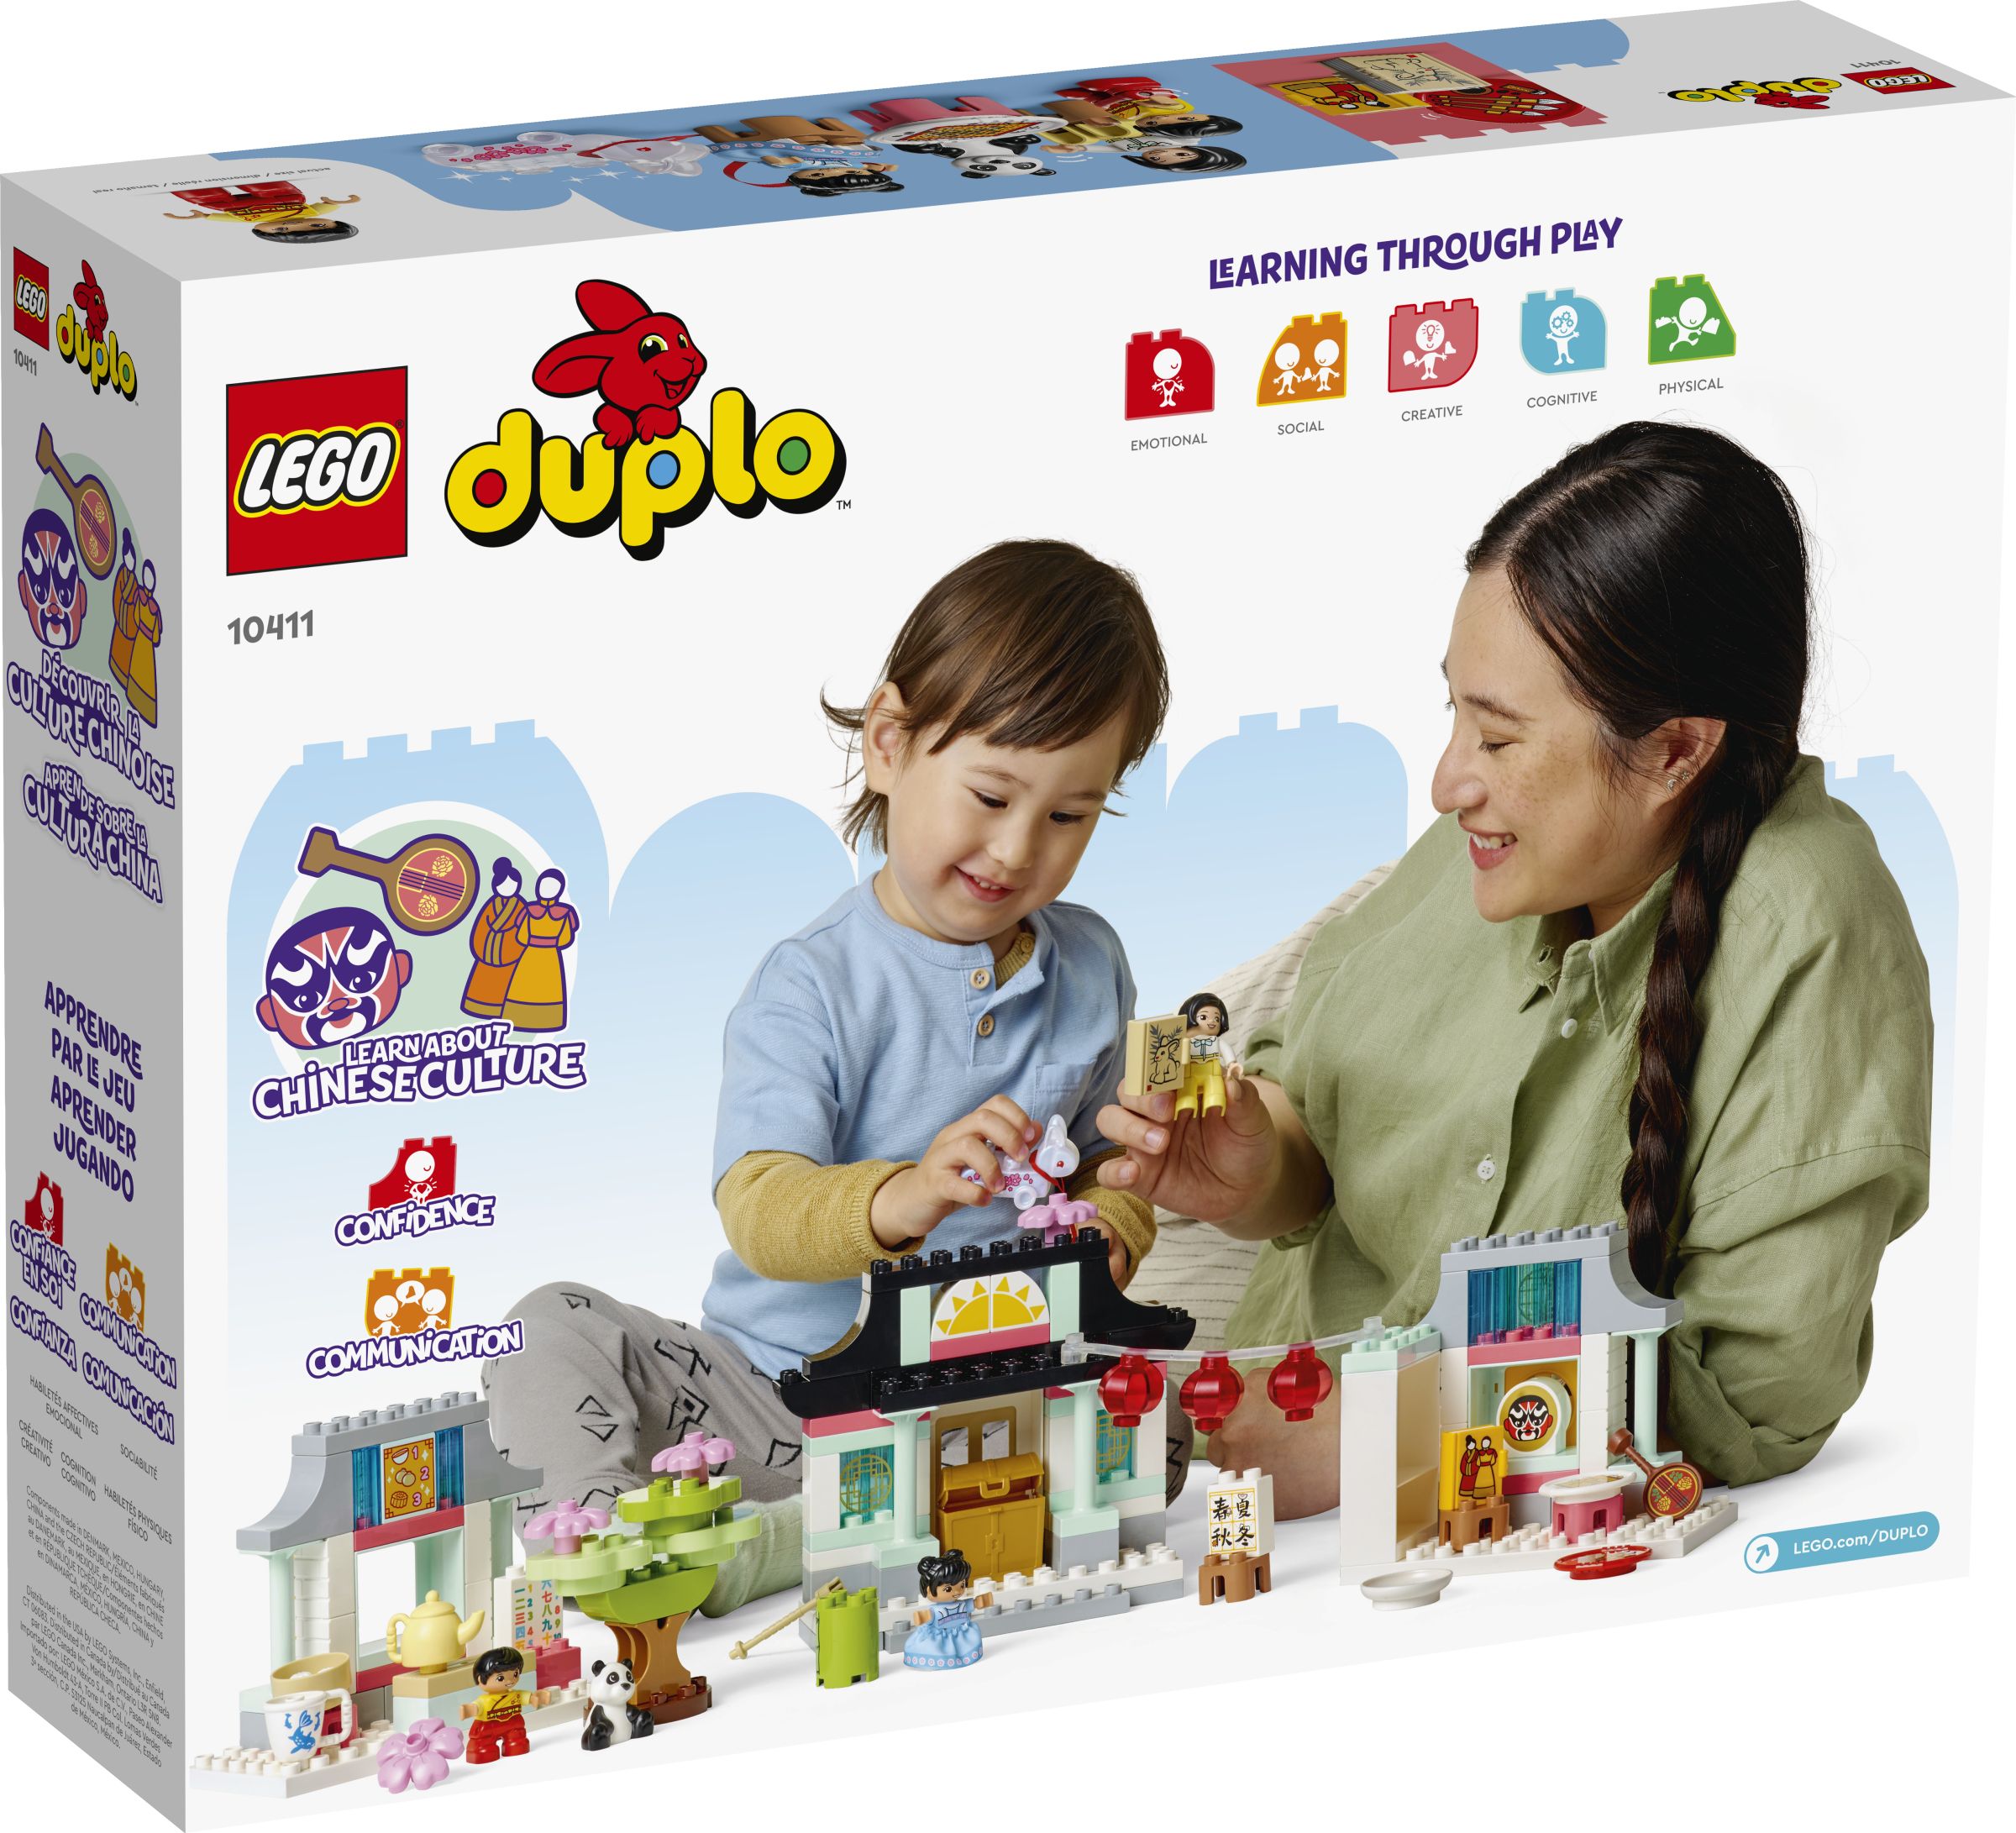 LEGO Duplo 10411 Learn about Chinese Culture LEGO_10411_alt10.jpg